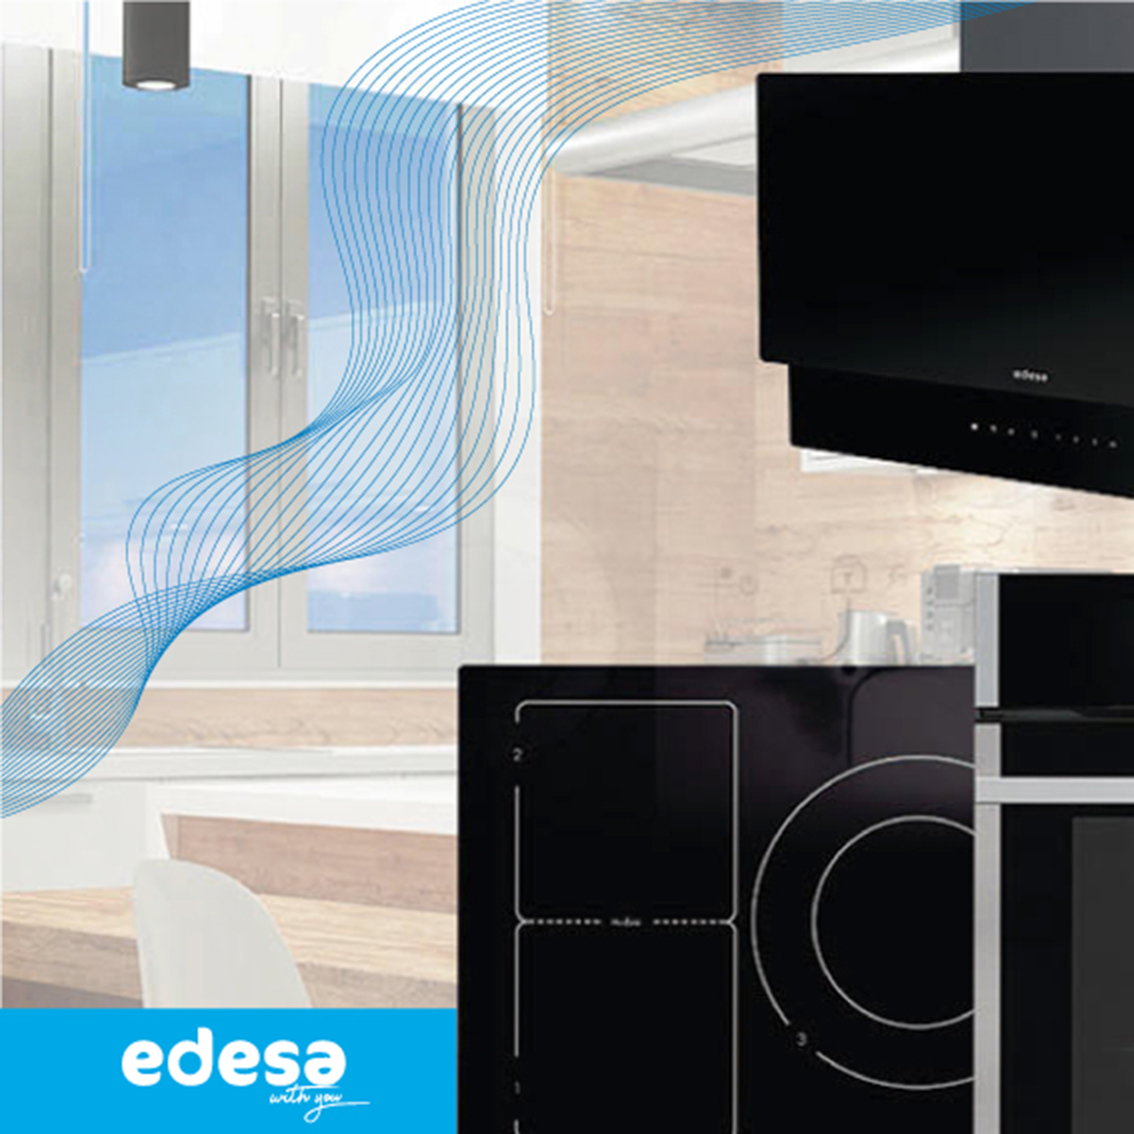 Edesa 2-wing refrigerator imported complete unit from Spain